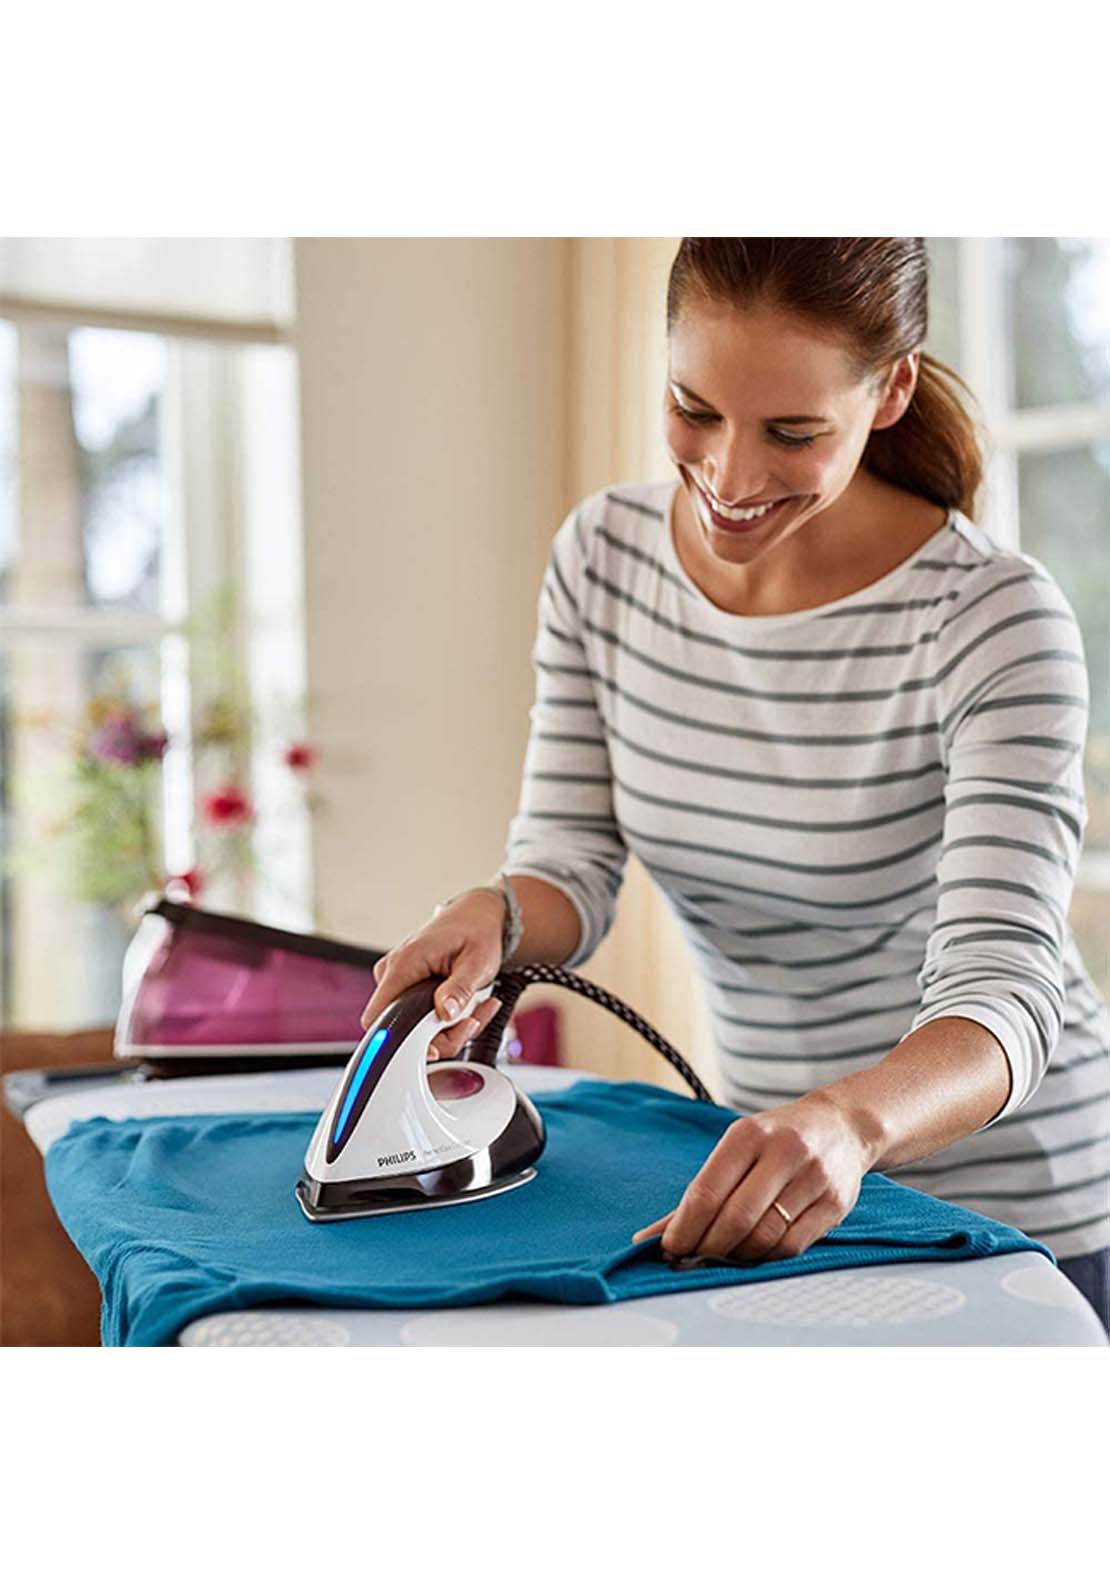 Philips PerfectCare Steam Iron | Gc784246 6 Shaws Department Stores